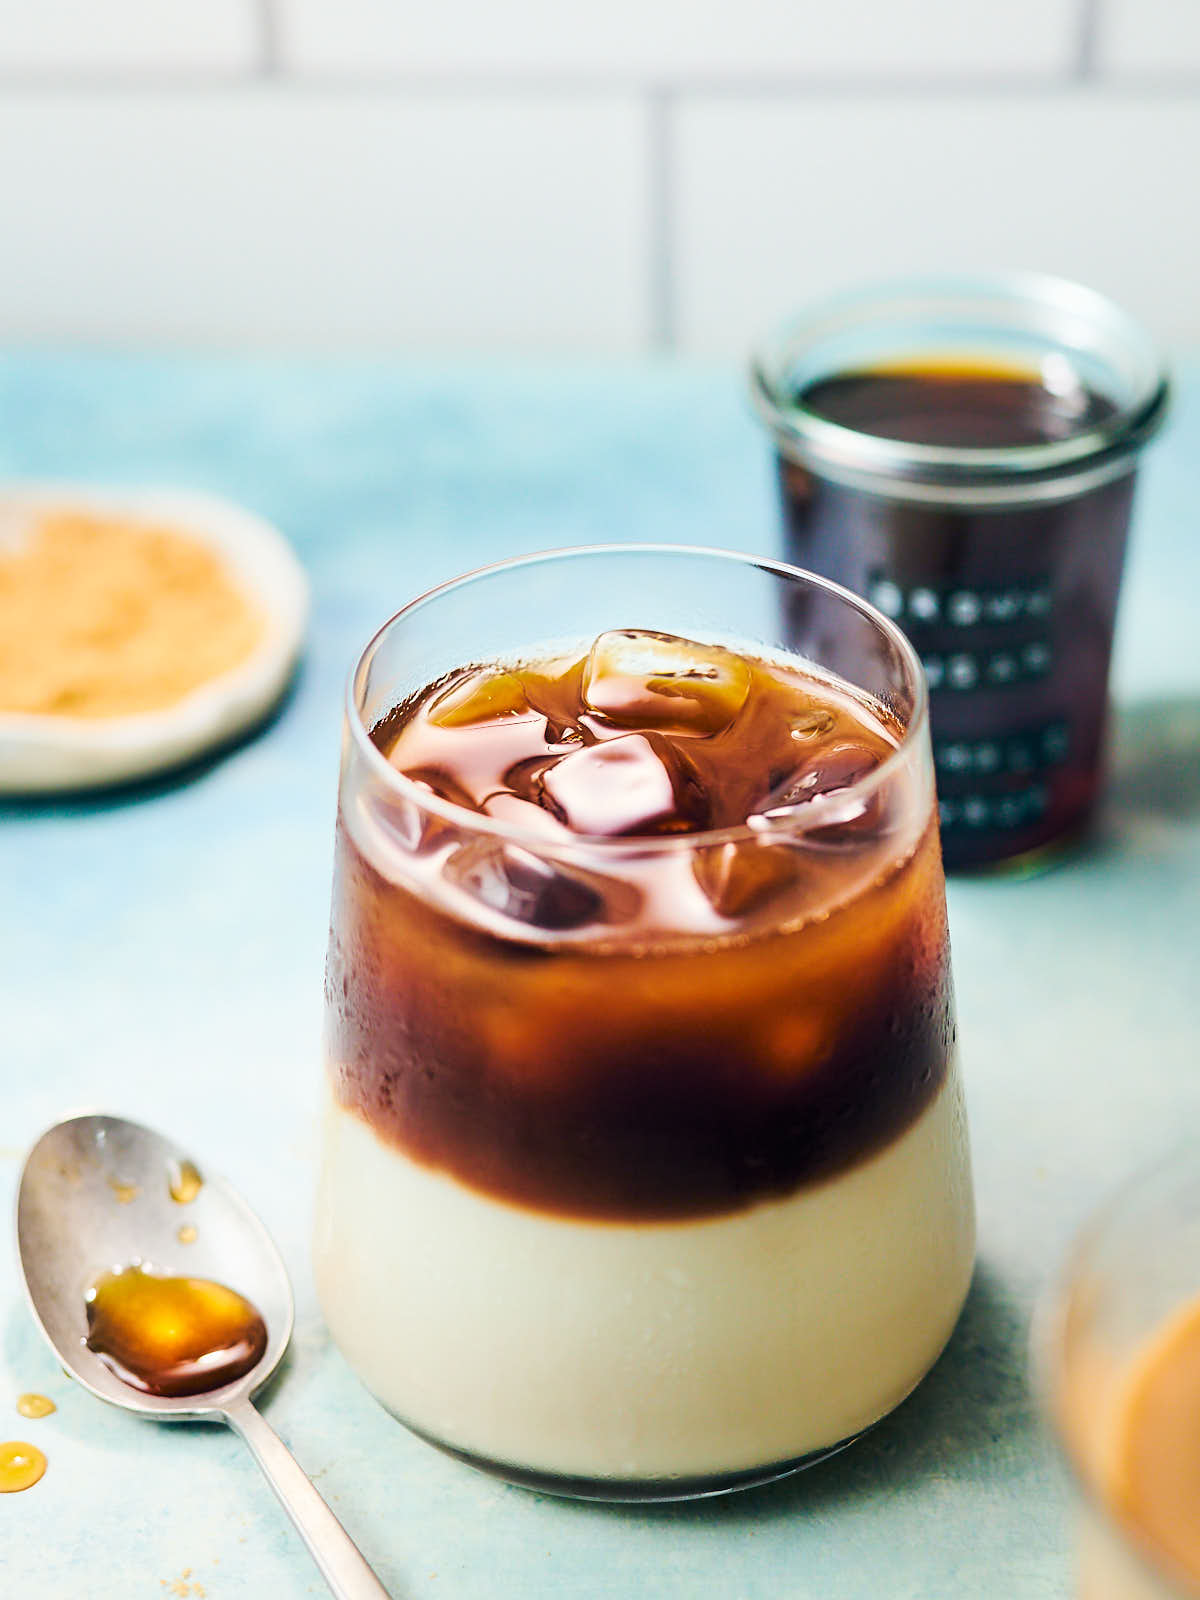 Iced coffee latte in a glass with brown sugar simple syrup.